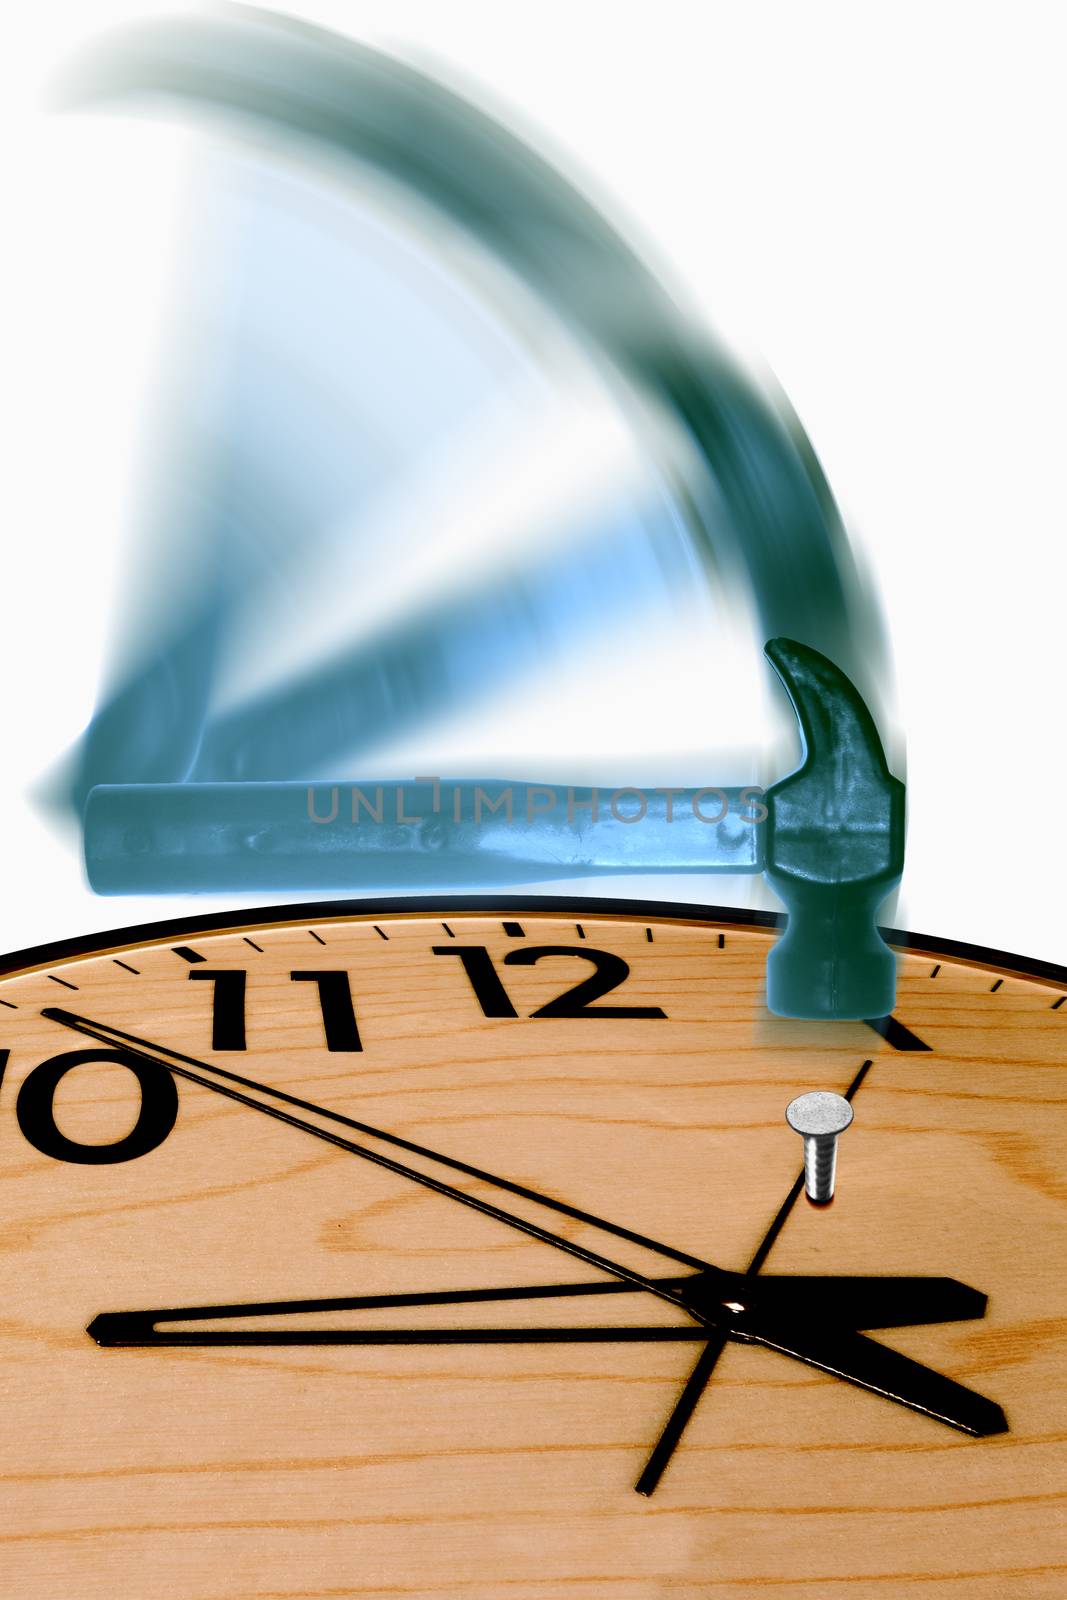 Hammer Hitting Nail in Clock with Motion Blur, Concept by yands